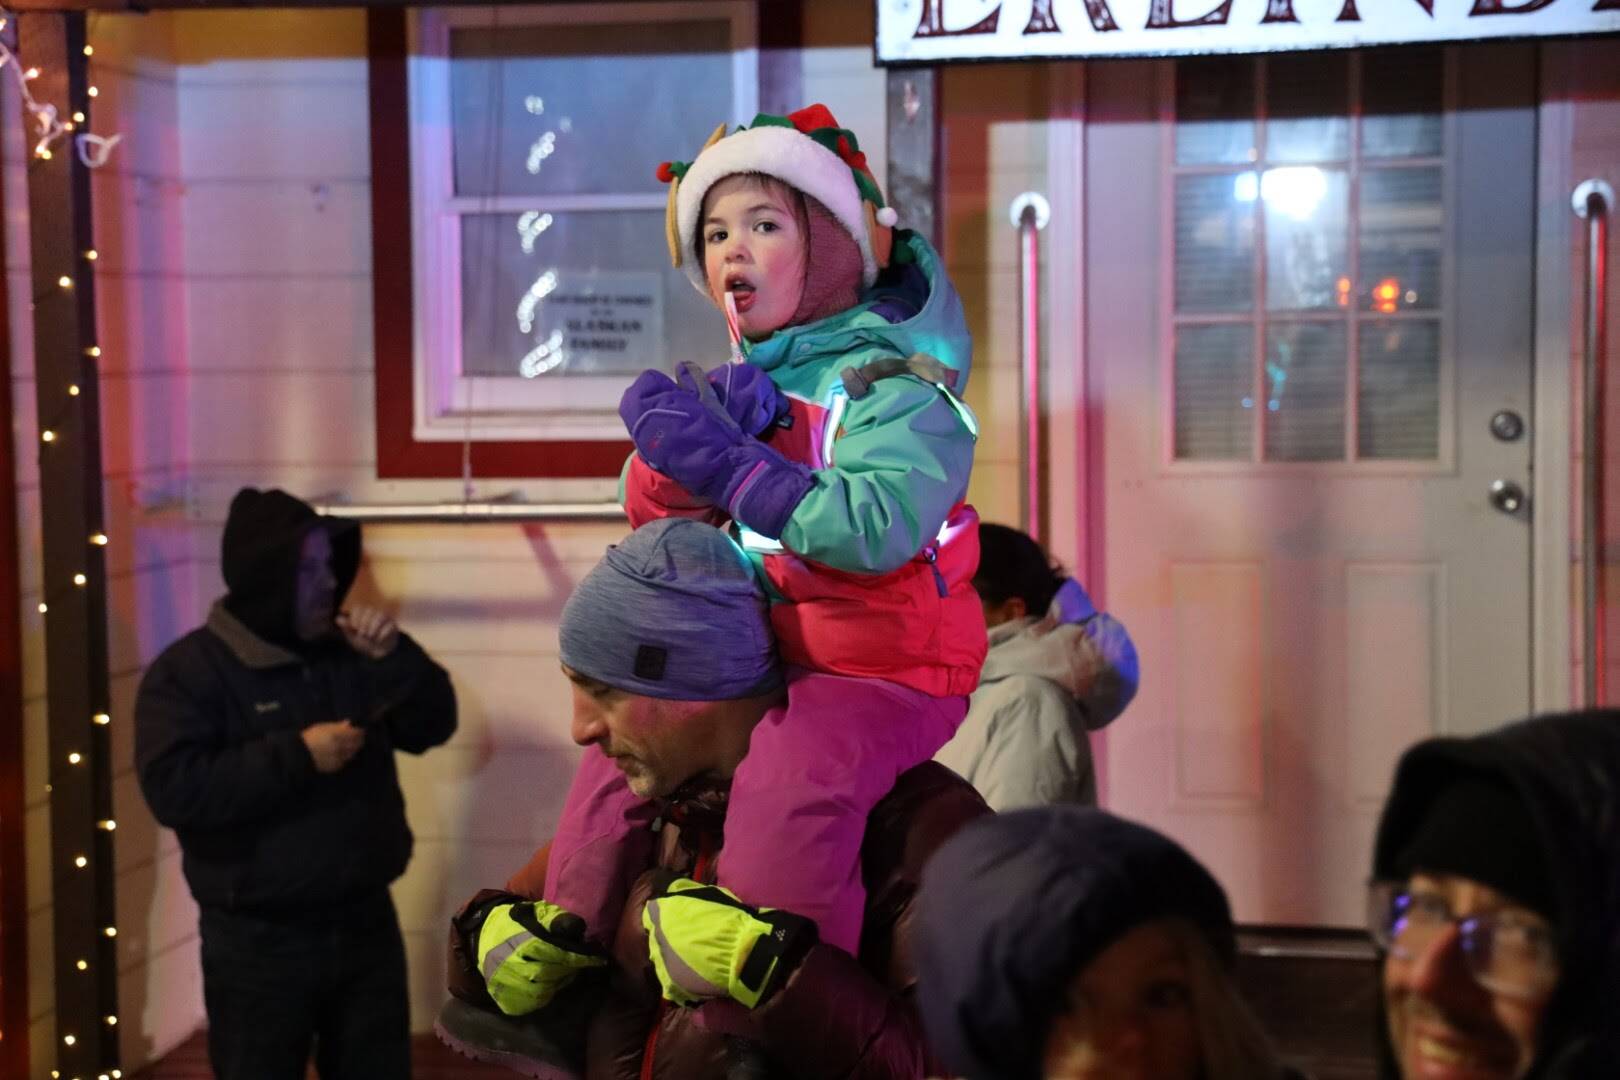 Liesel Thier, 4, snacks on a candy cane while on the shoulders of her dad during the downtown Santa parade Saturday evening. (Clarise Larson / Juneau Empire)